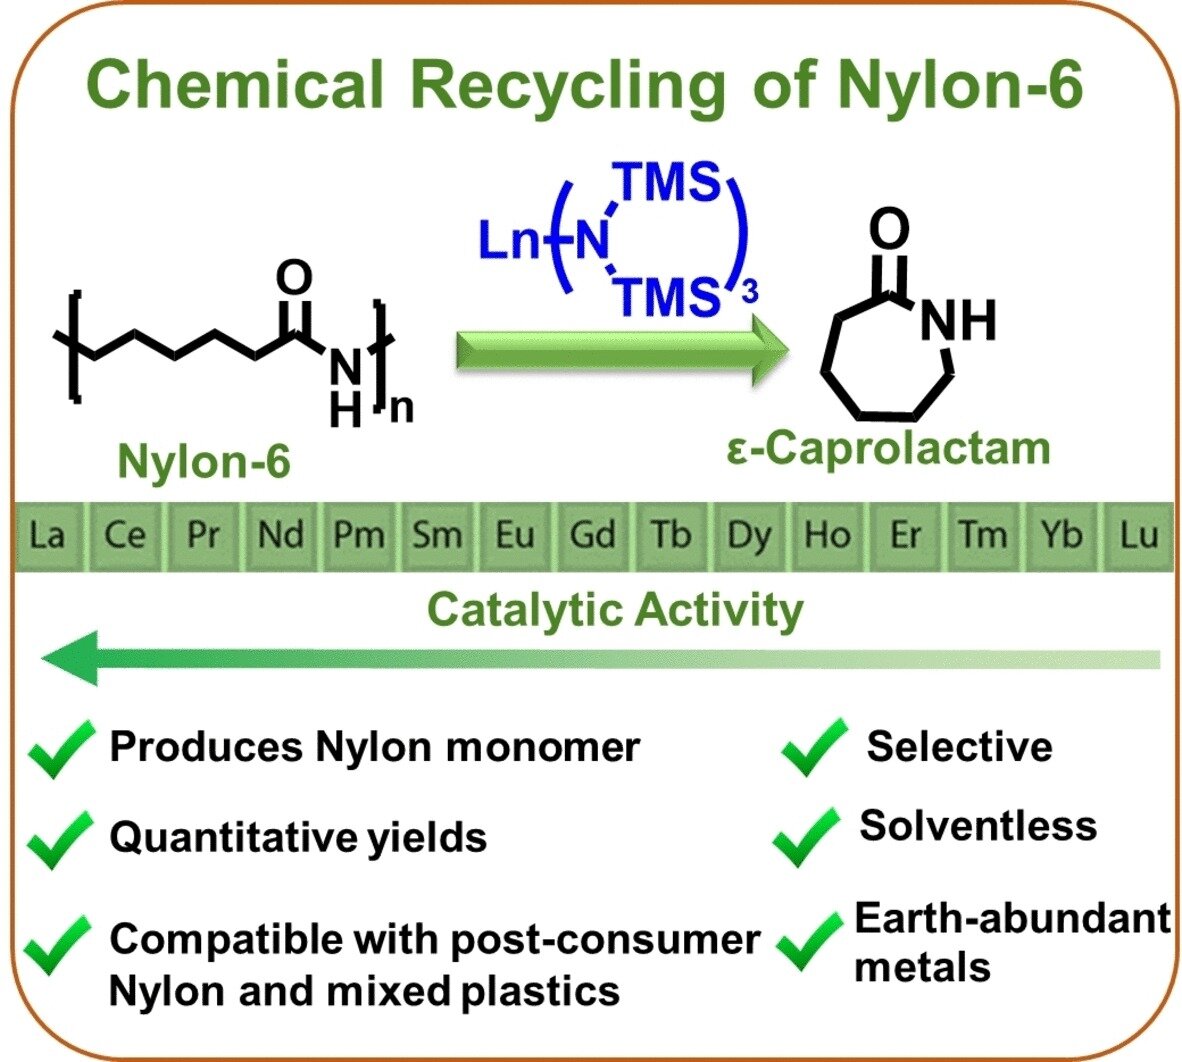 A new method to recycle Nylon-6 by unlinking polymer chains